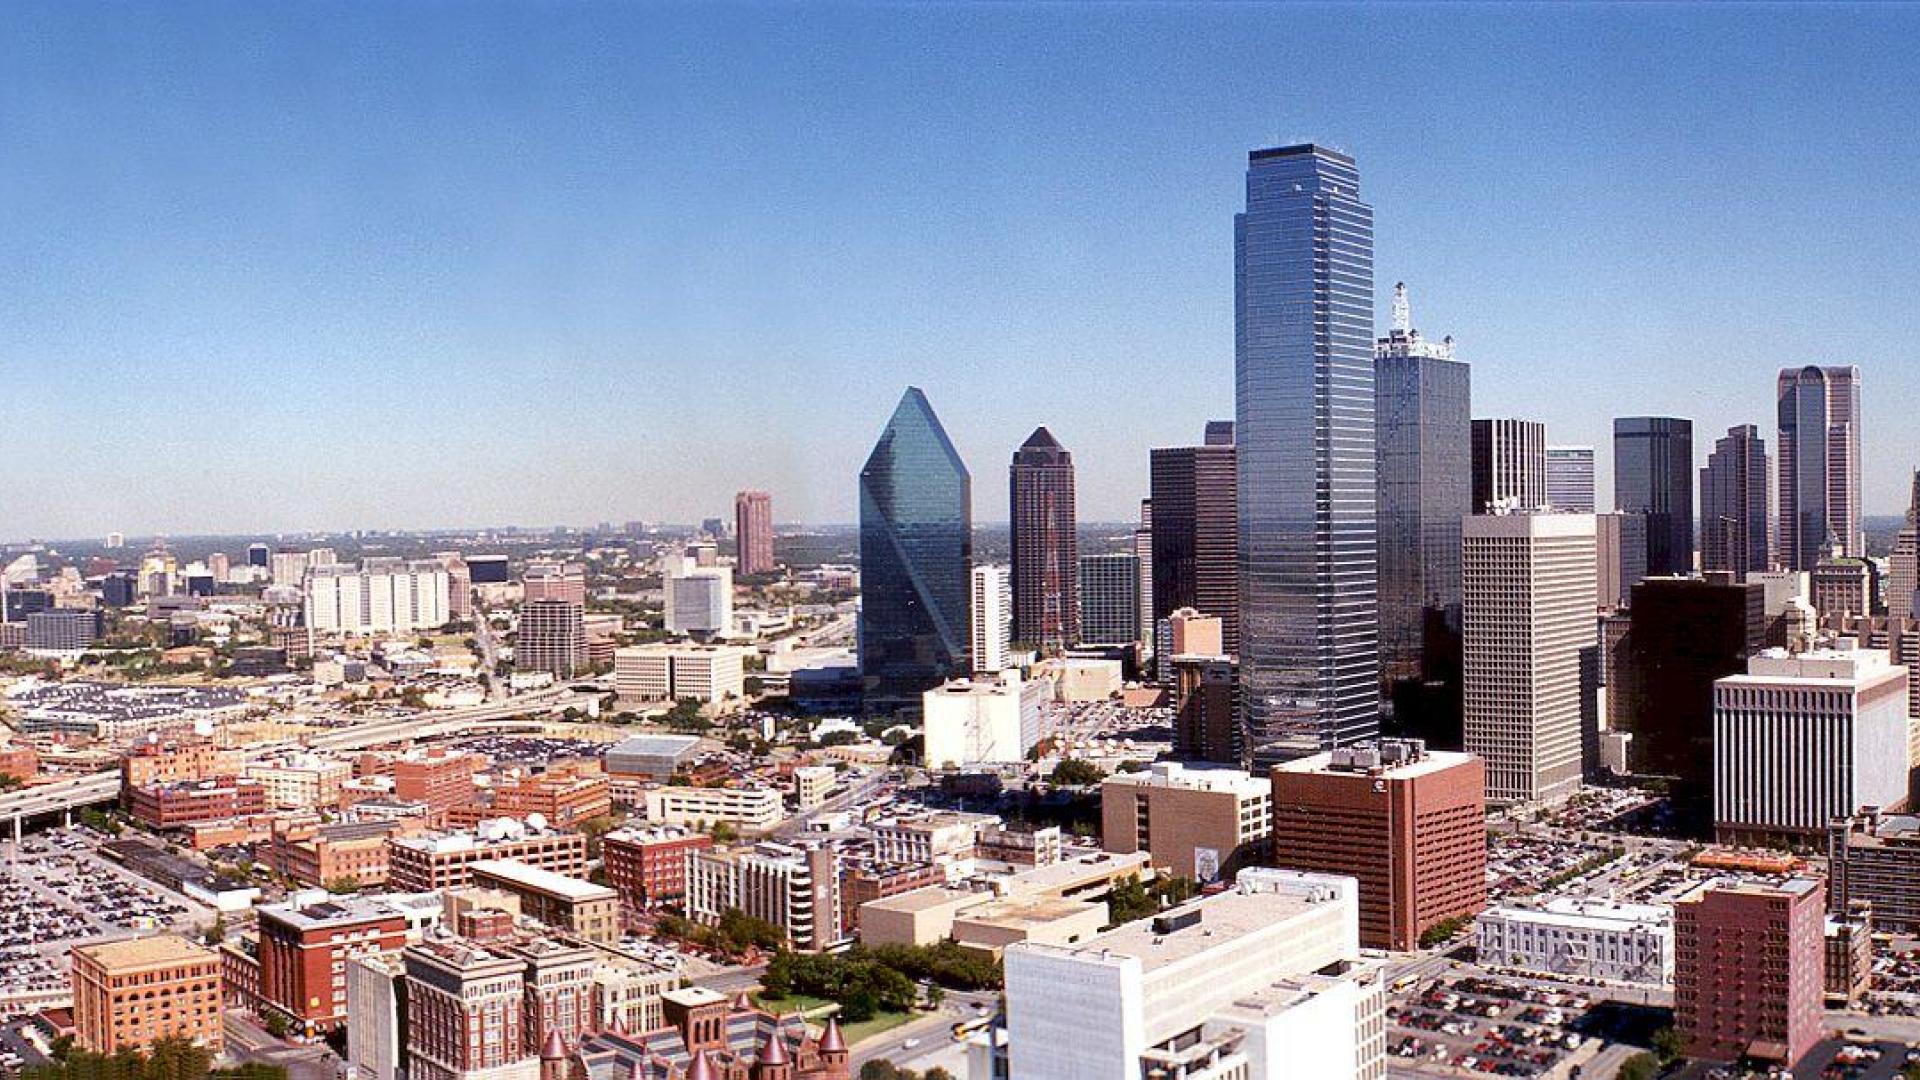 Dallas tx skyline   81575   High Quality and Resolution Wallpapers